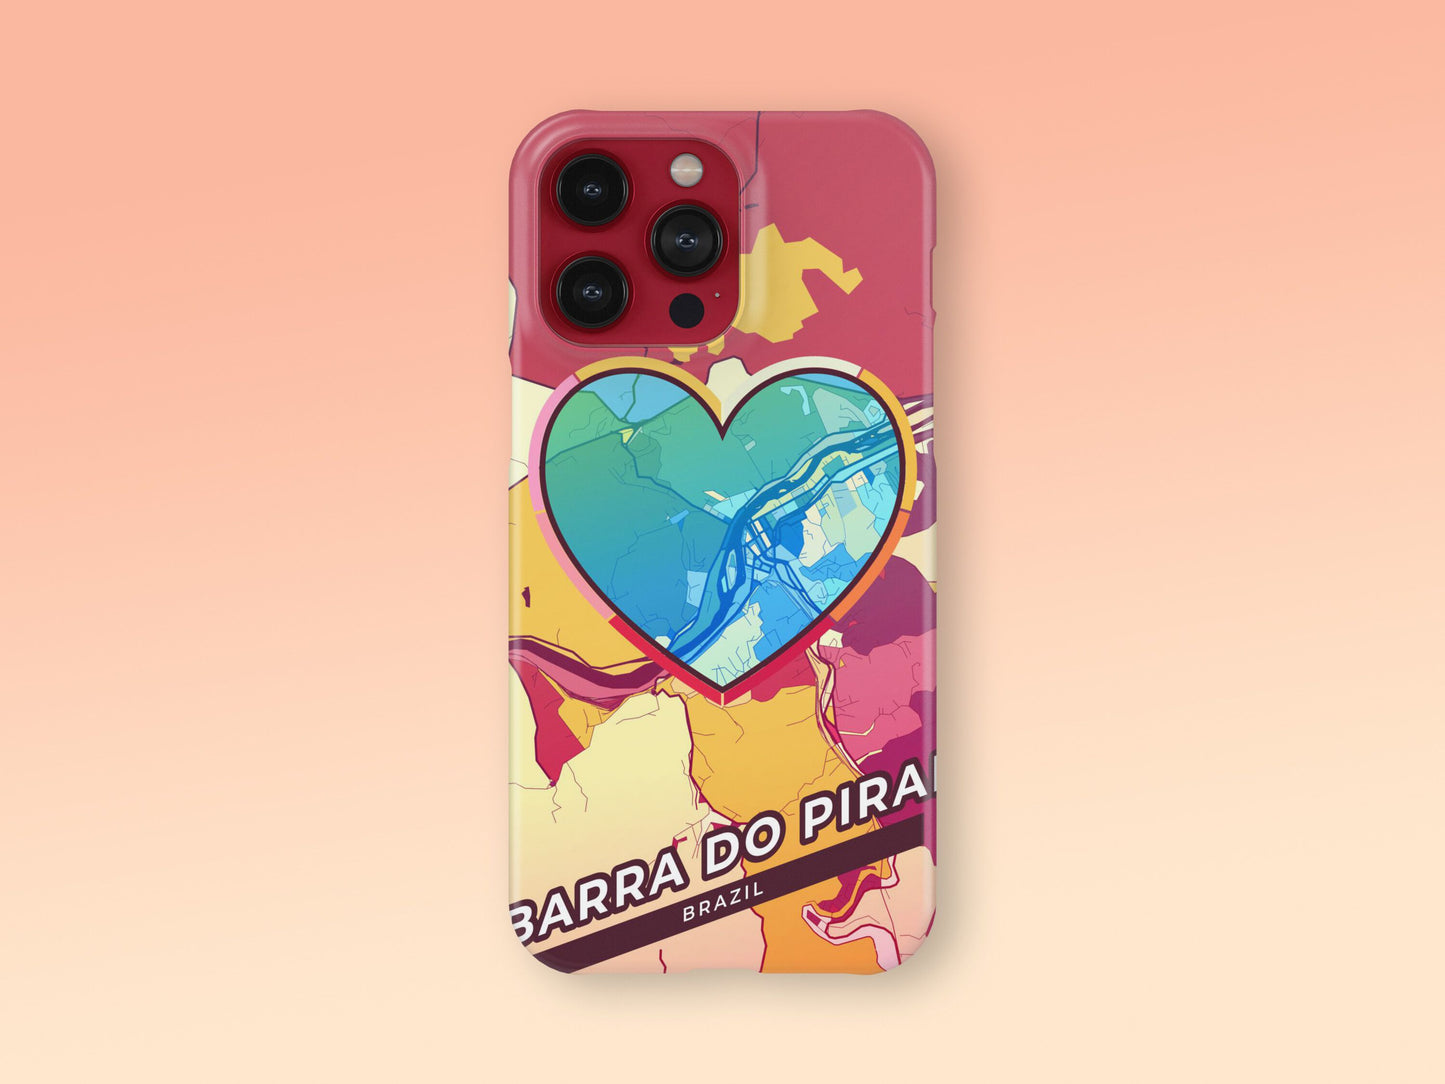 Barra Do Pirai Brazil slim phone case with colorful icon. Birthday, wedding or housewarming gift. Couple match cases. 2